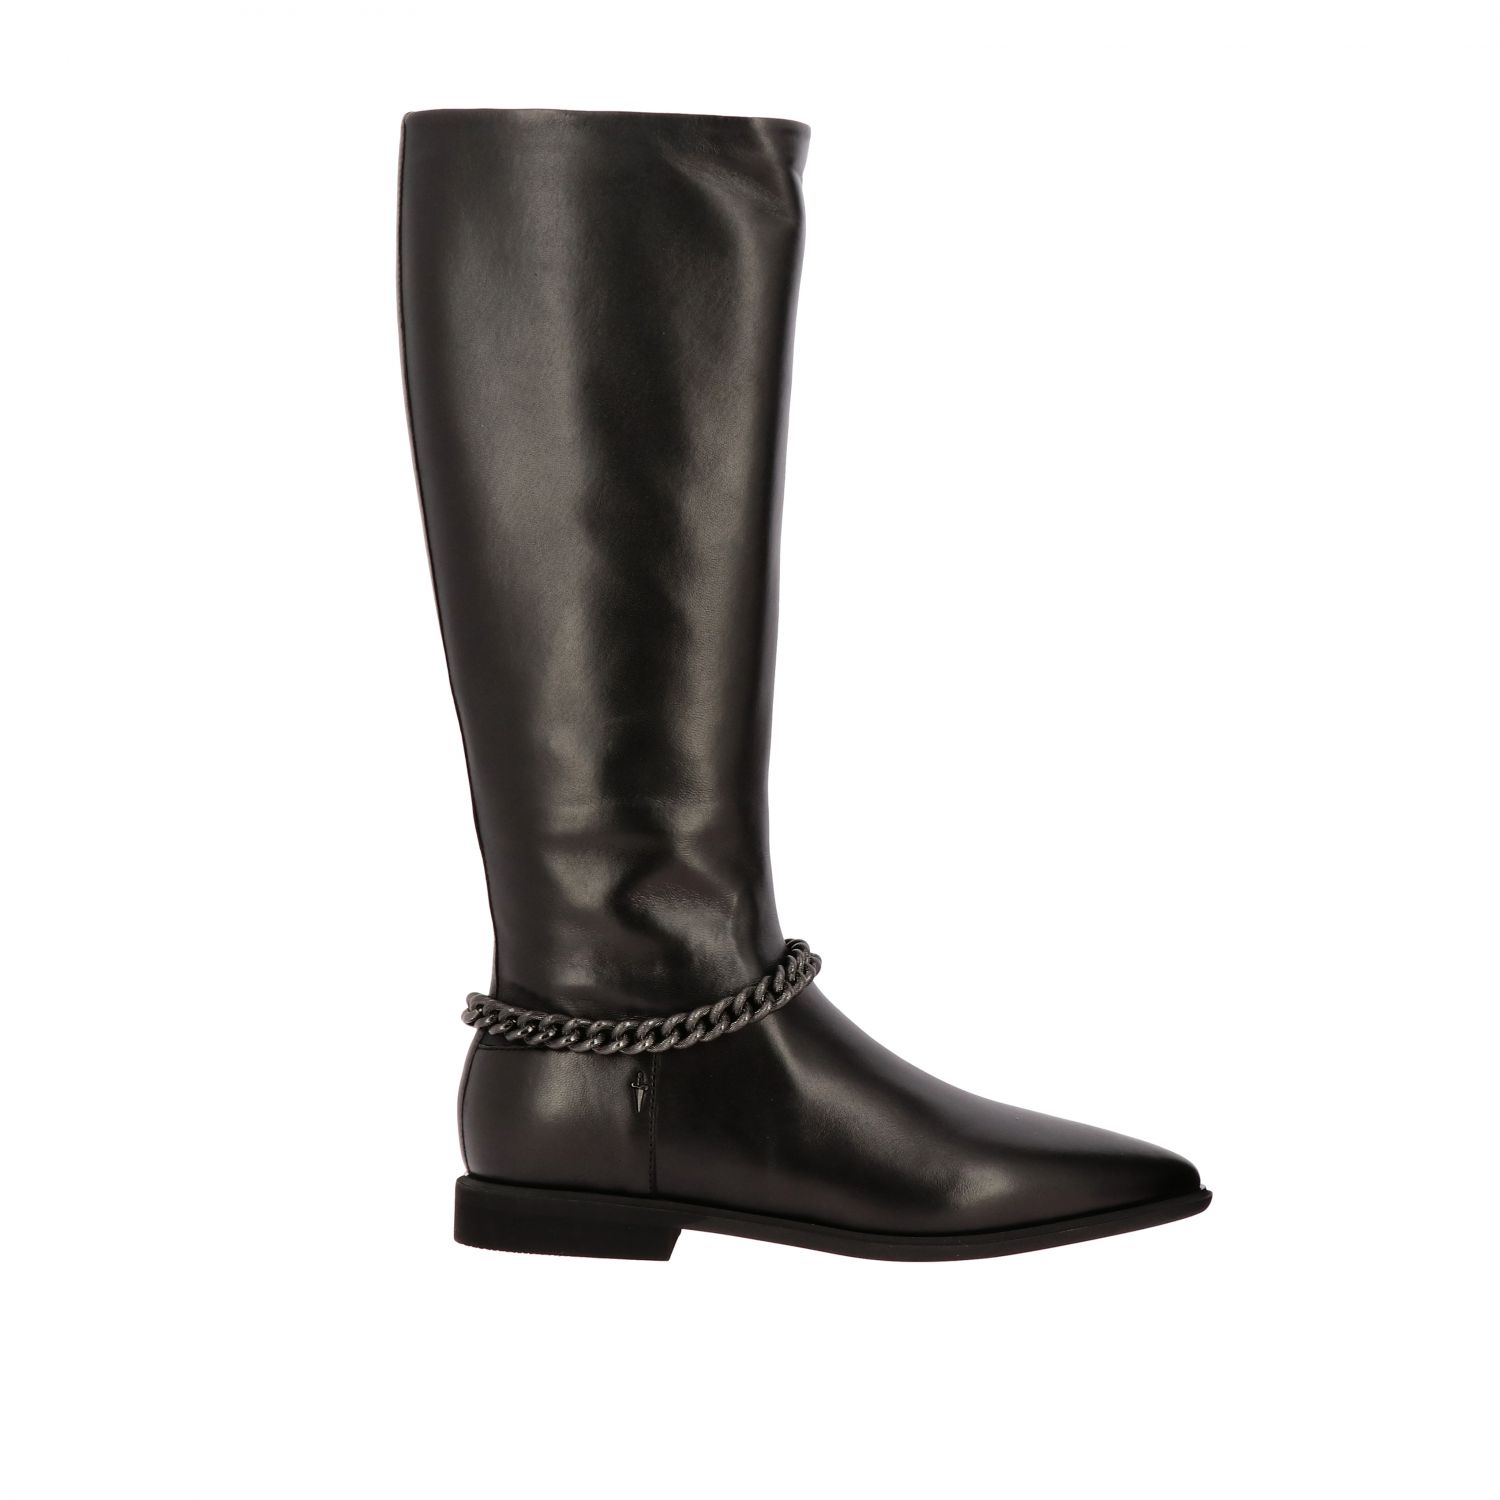 Paciotti 4Us Outlet: Boots women - Black | Boots Paciotti 4Us ZD20NM ...